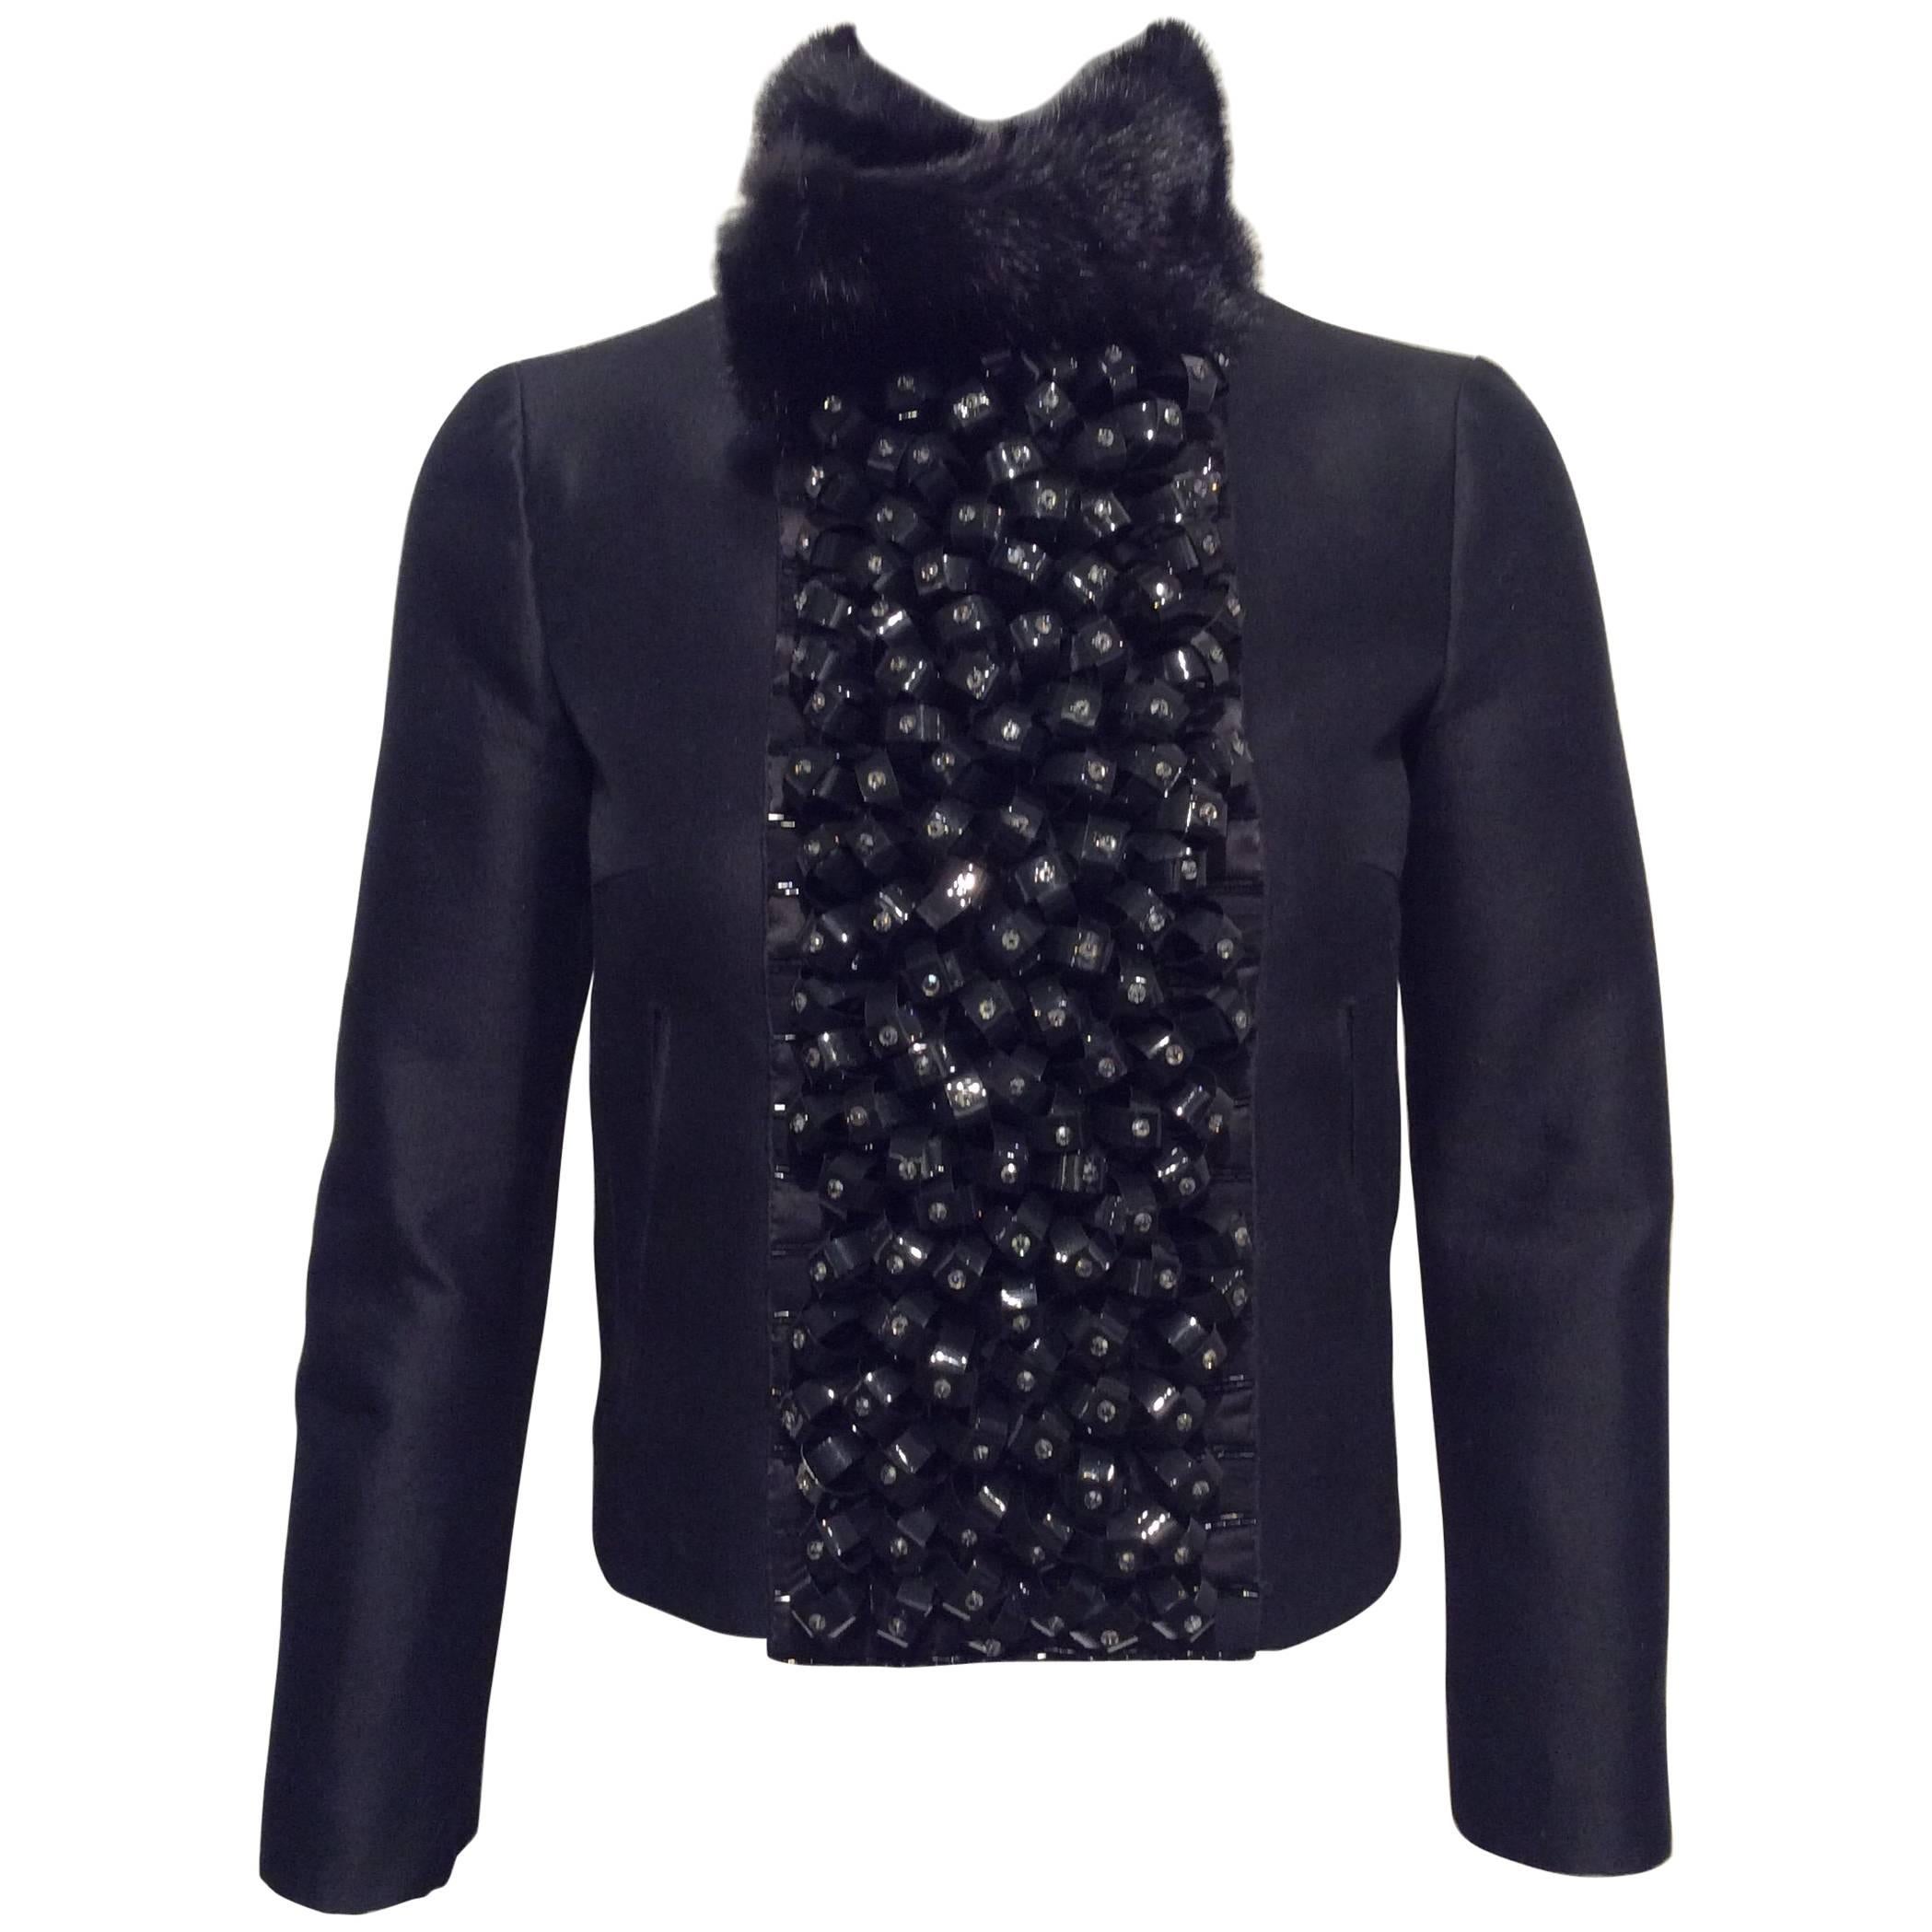 Dsquared Black Jacket With Embellished Front Panel And Mink Collar Sz 2